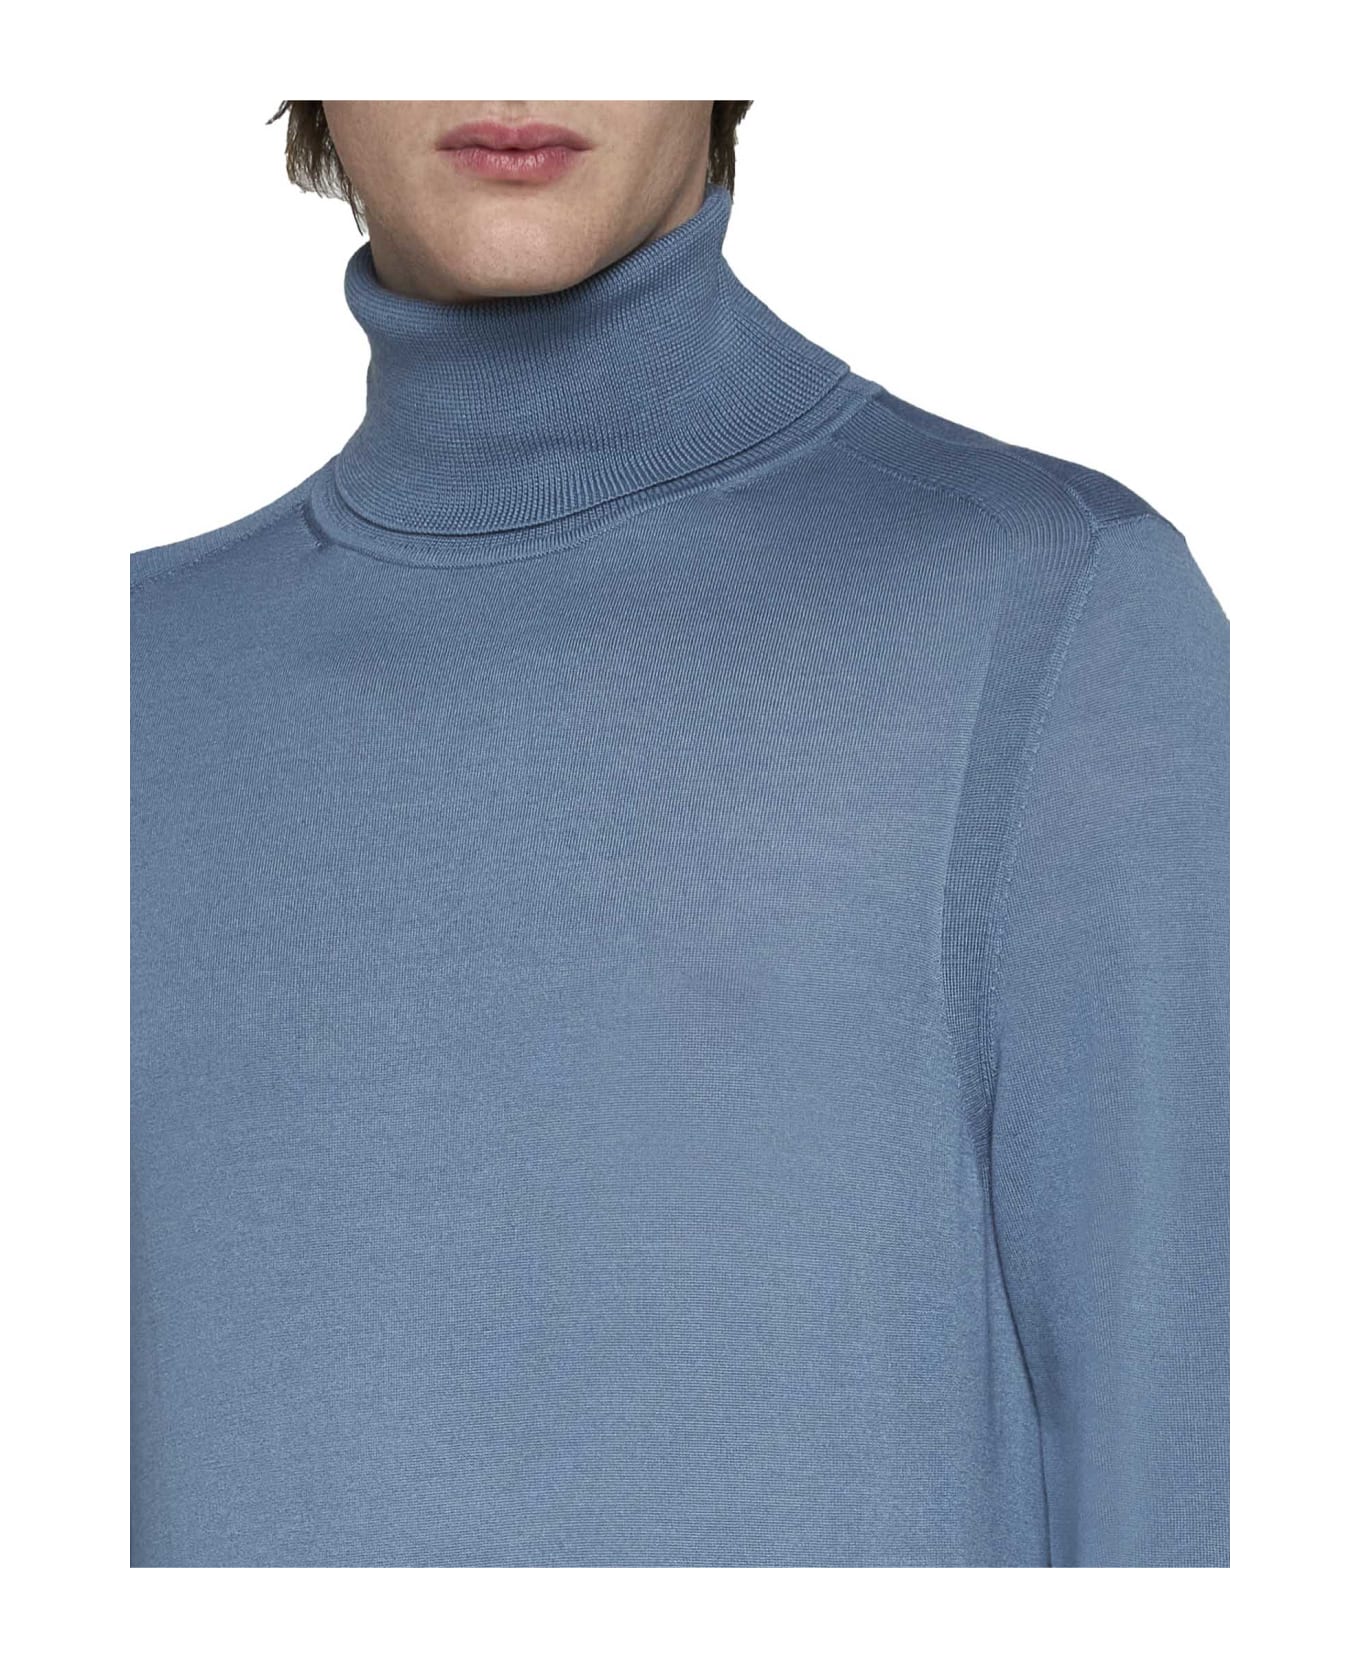 Paul Smith Sweater - Turquoise